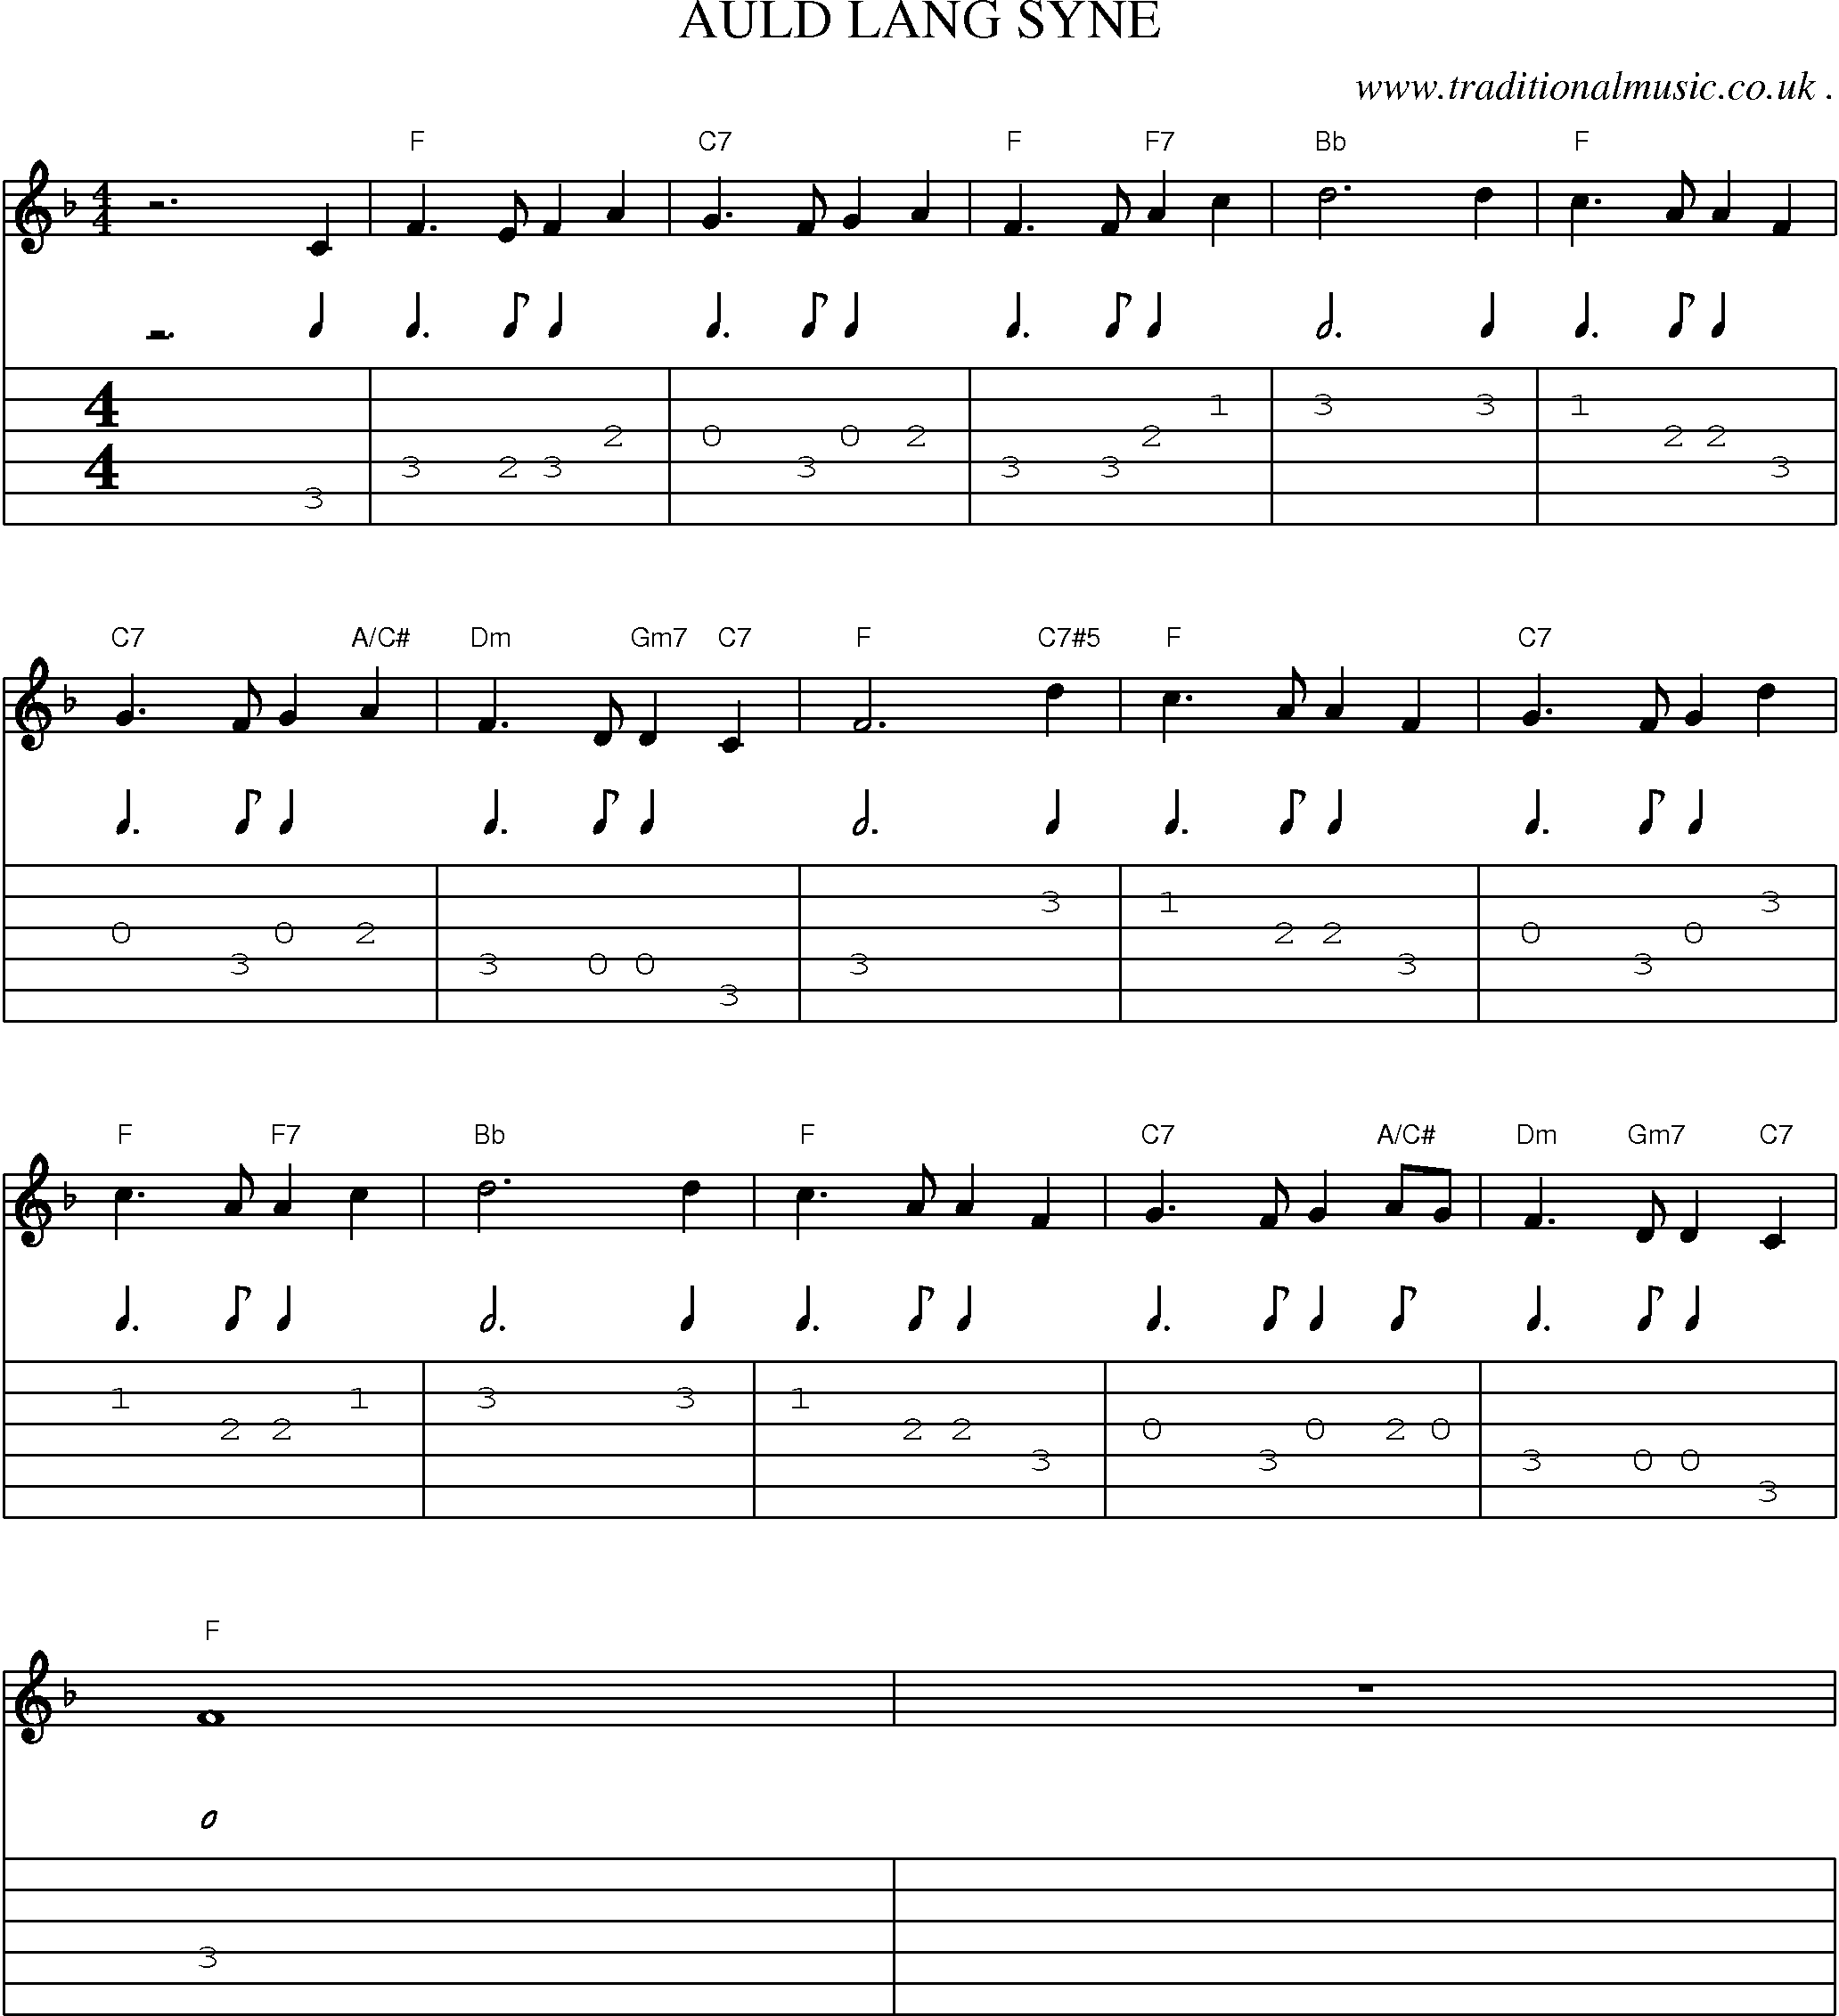 Music Score and Guitar Tabs for Auld Lang Syne